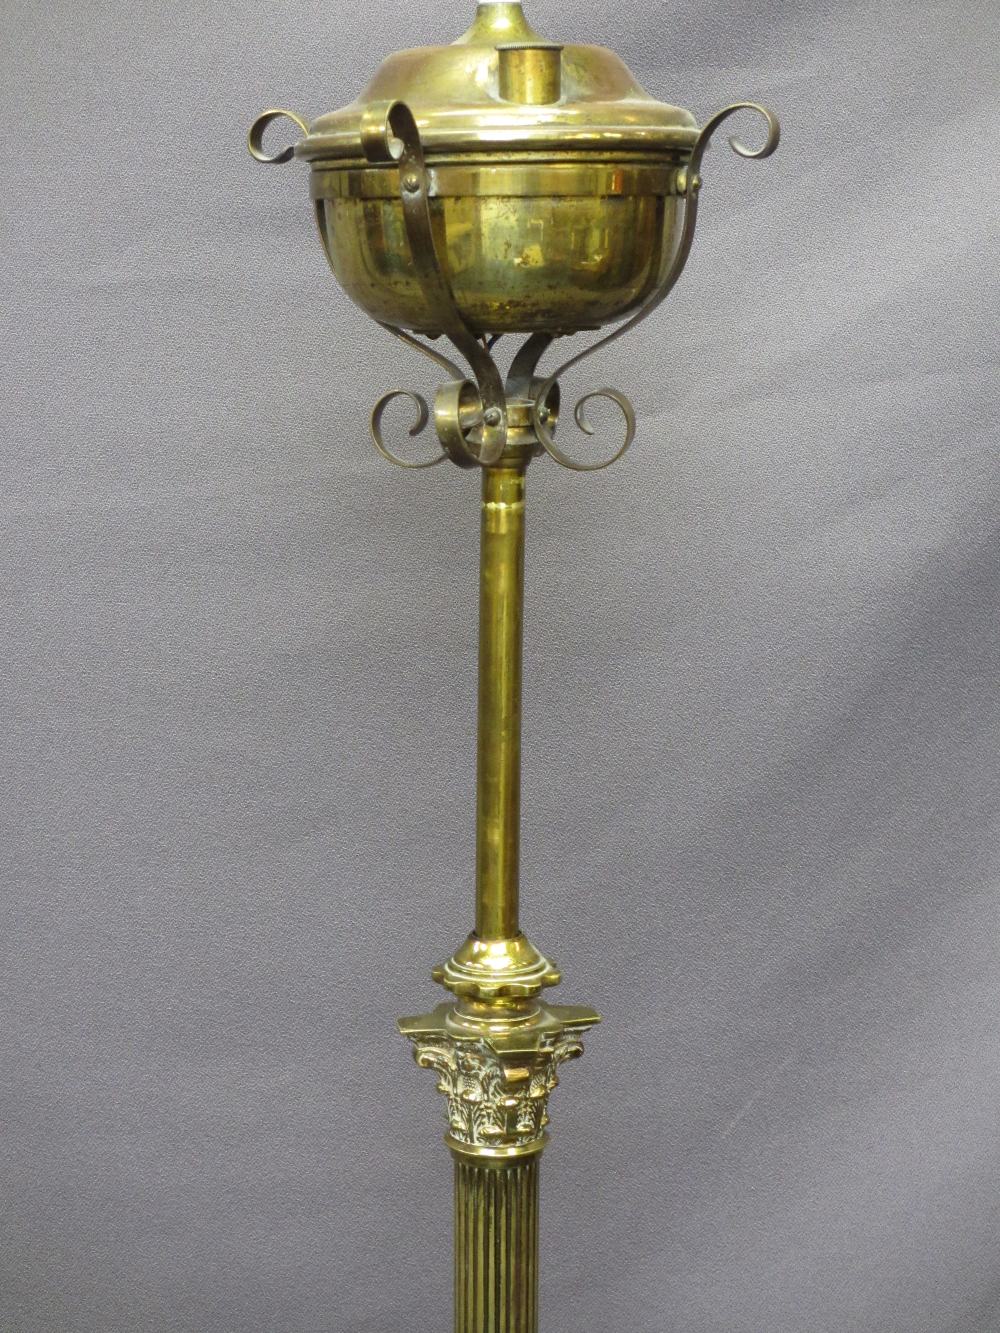 QUALITY BRASS CORINTHIAN COLUMN TOP ADJUSTABLE STANDARD LAMP converted for electricity - Image 2 of 3